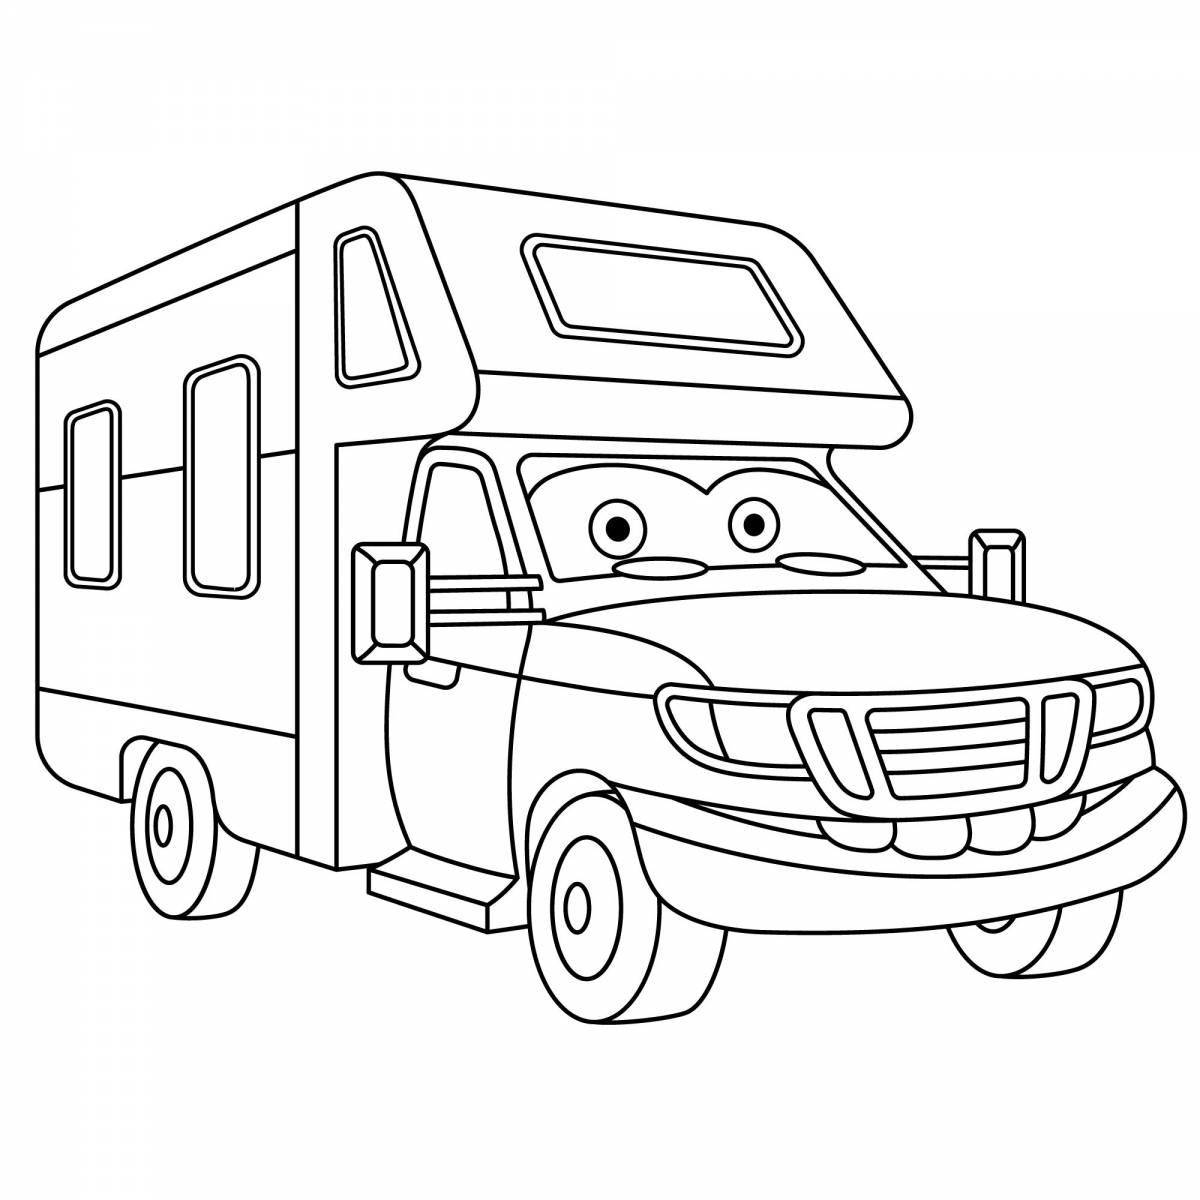 Adorable mobile house coloring for toddlers